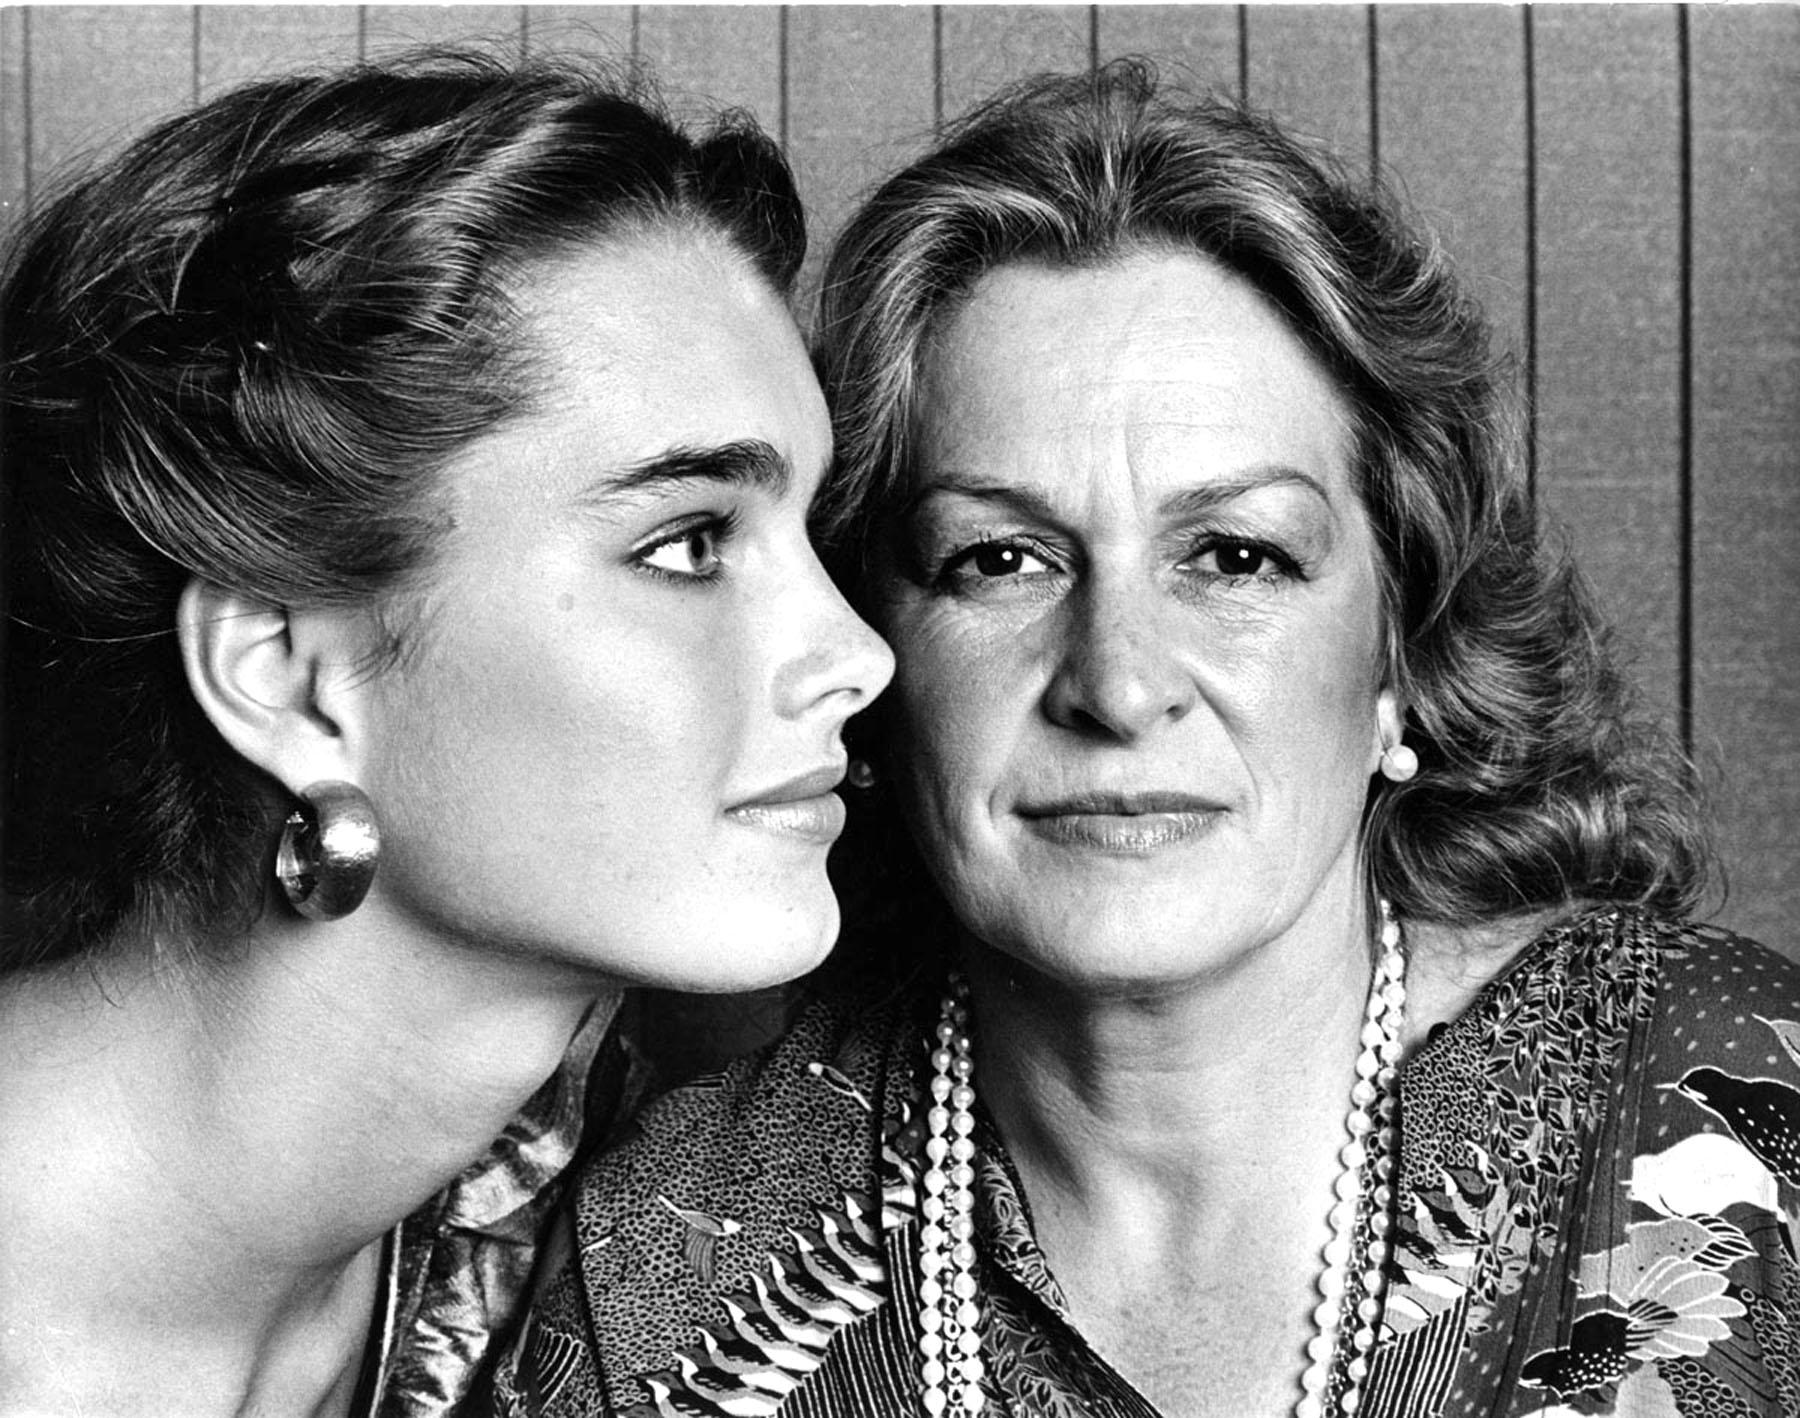 Brooke Shields & her mother Teri, signed by Jack Mitchell